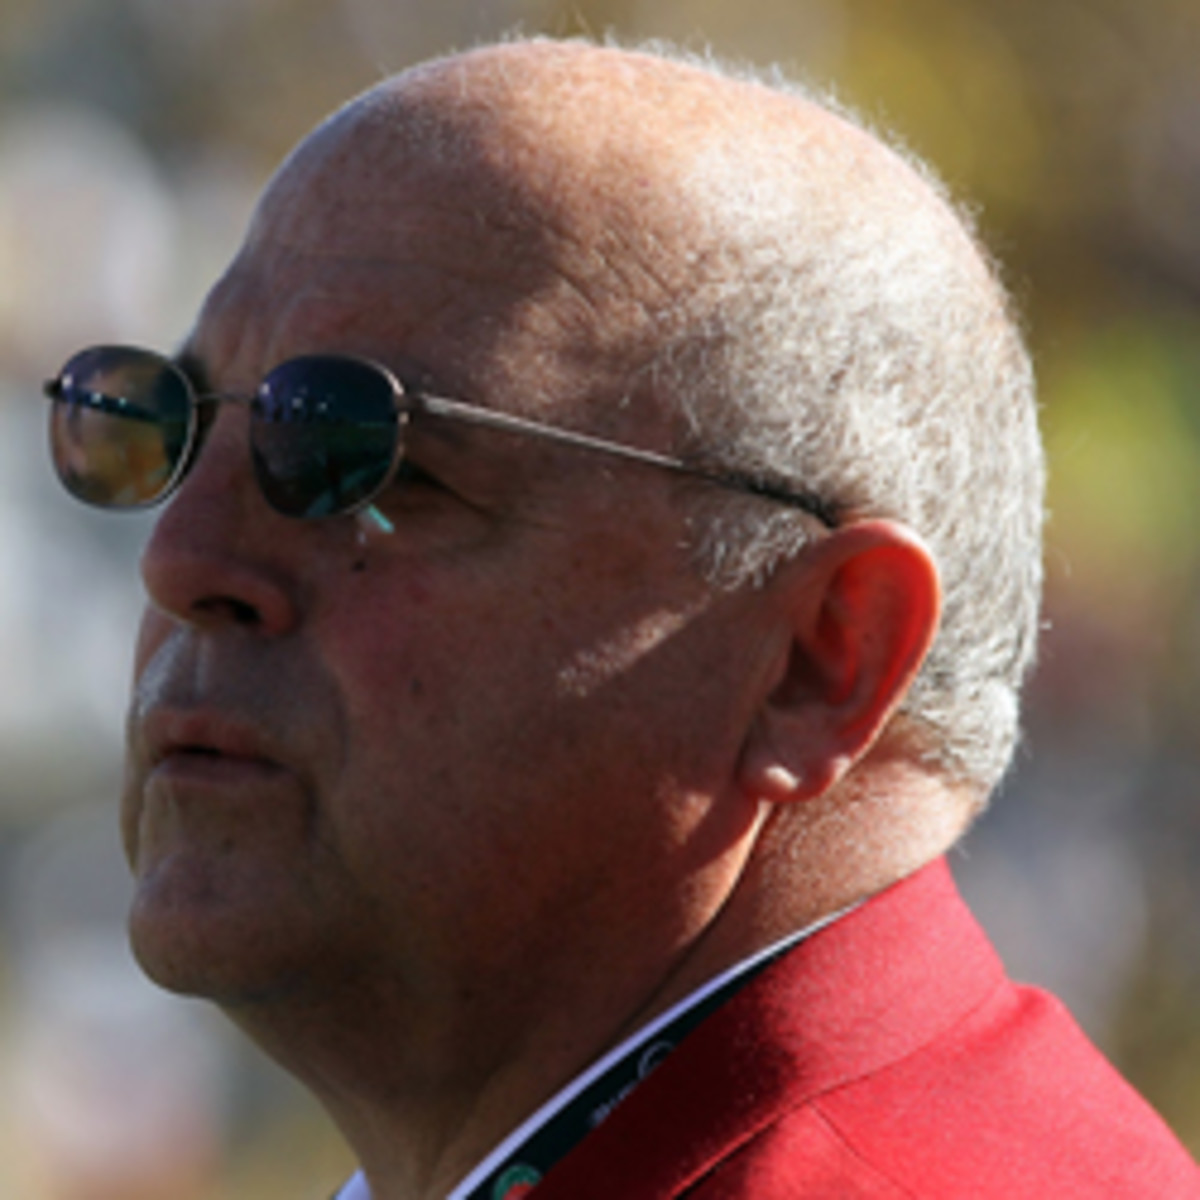 Barry Alvarez will coach Wisconsin against Stanford in the Rose Bowl. (Jeff Gross/Getty Images)